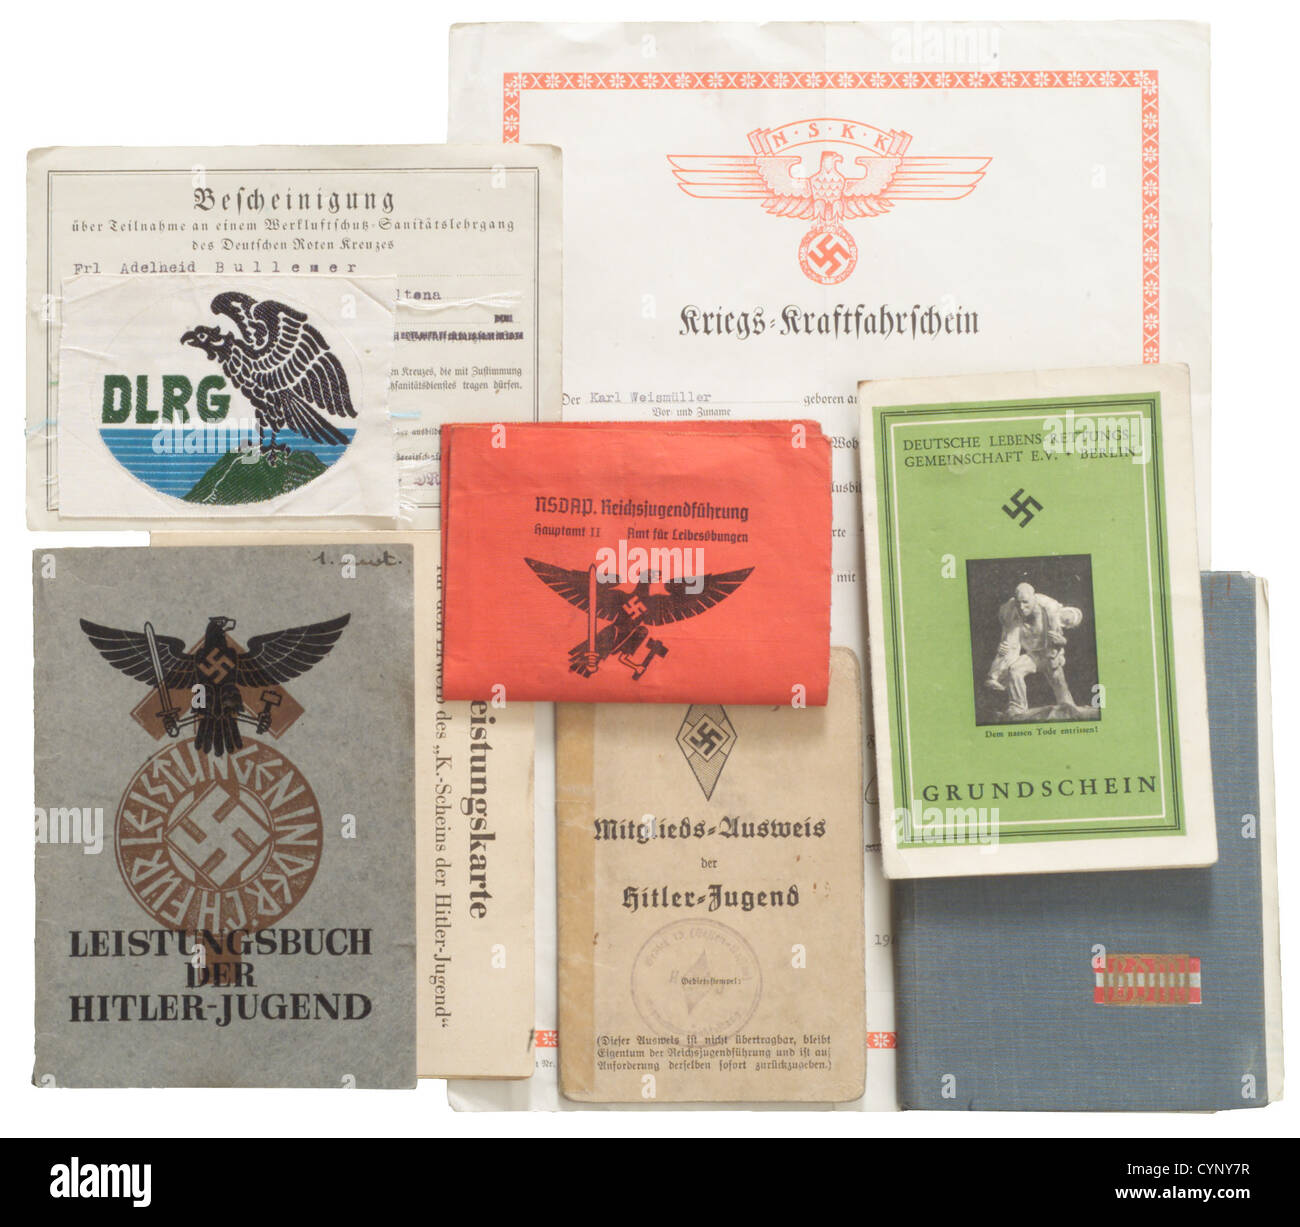 Hitler Youth / League of German Girls,German history,National Socialism,historic,historical,membership cards,certificates and driving licence of a Hitler Youth boy,League of German Girls service book,German Lifeguard Association,historic,historical,1930s,1930s,20th century,League of German Girls,Band of German Maidens,youth organization,youth organizations,NS,National Socialism,Nazism,Third Reich,German Reich,Germany,National Socialist,Nazi,Nazi period,utensil,piece of equipment,utensils,object,objects,stills,clipping,clippings,Additional-Rights-Clearences-Not Available Stock Photo